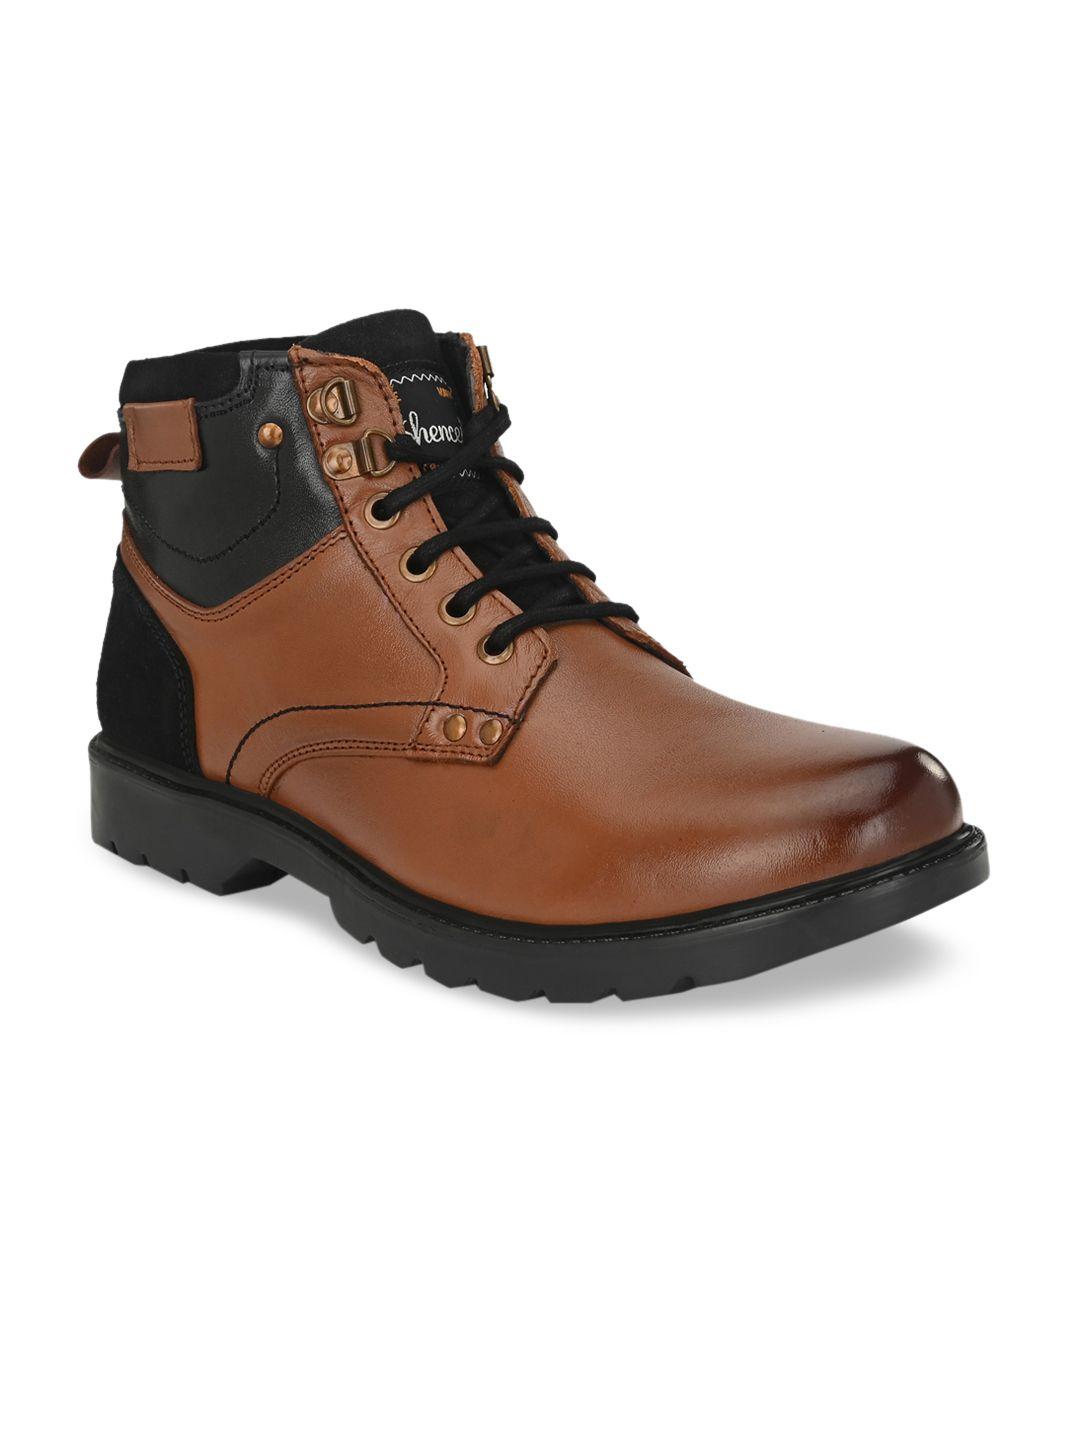 shences men brown high top genuine leather flat boots